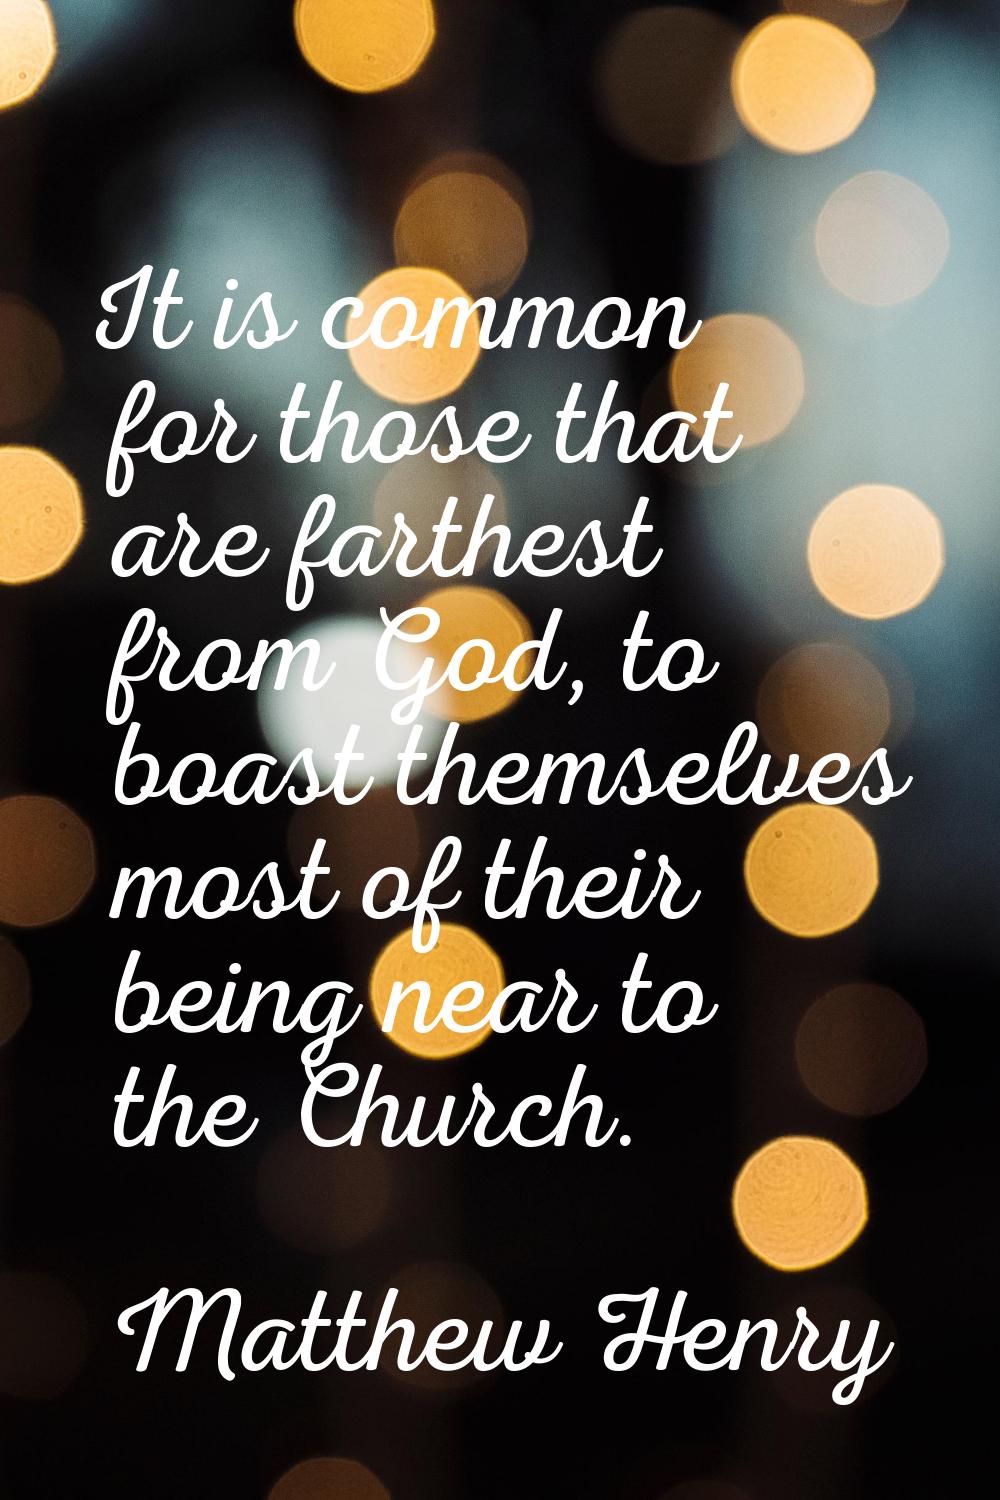 It is common for those that are farthest from God, to boast themselves most of their being near to 